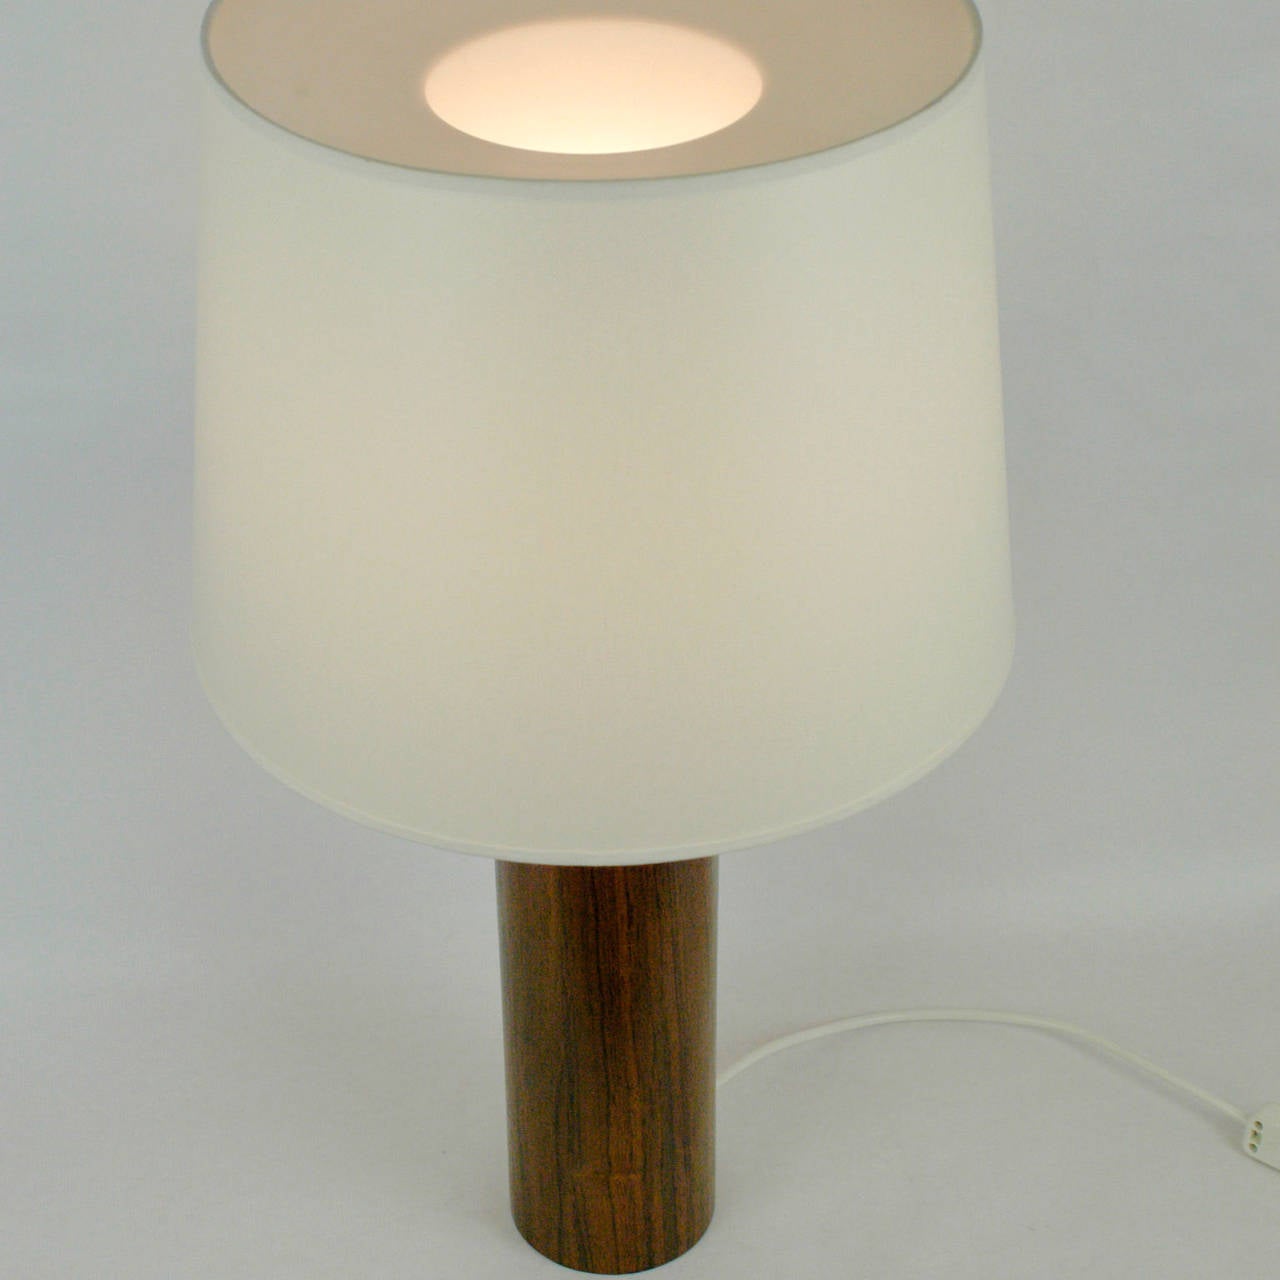 Timeless pure classic Scandinavian Modern table lamp designed by Uno & Östen Kristiansson for Luxus Vittsjö Sweden. It has a cylindrical rosewood venered base and a renewed cream white shade, original manufacturers label still on the base
Perfect